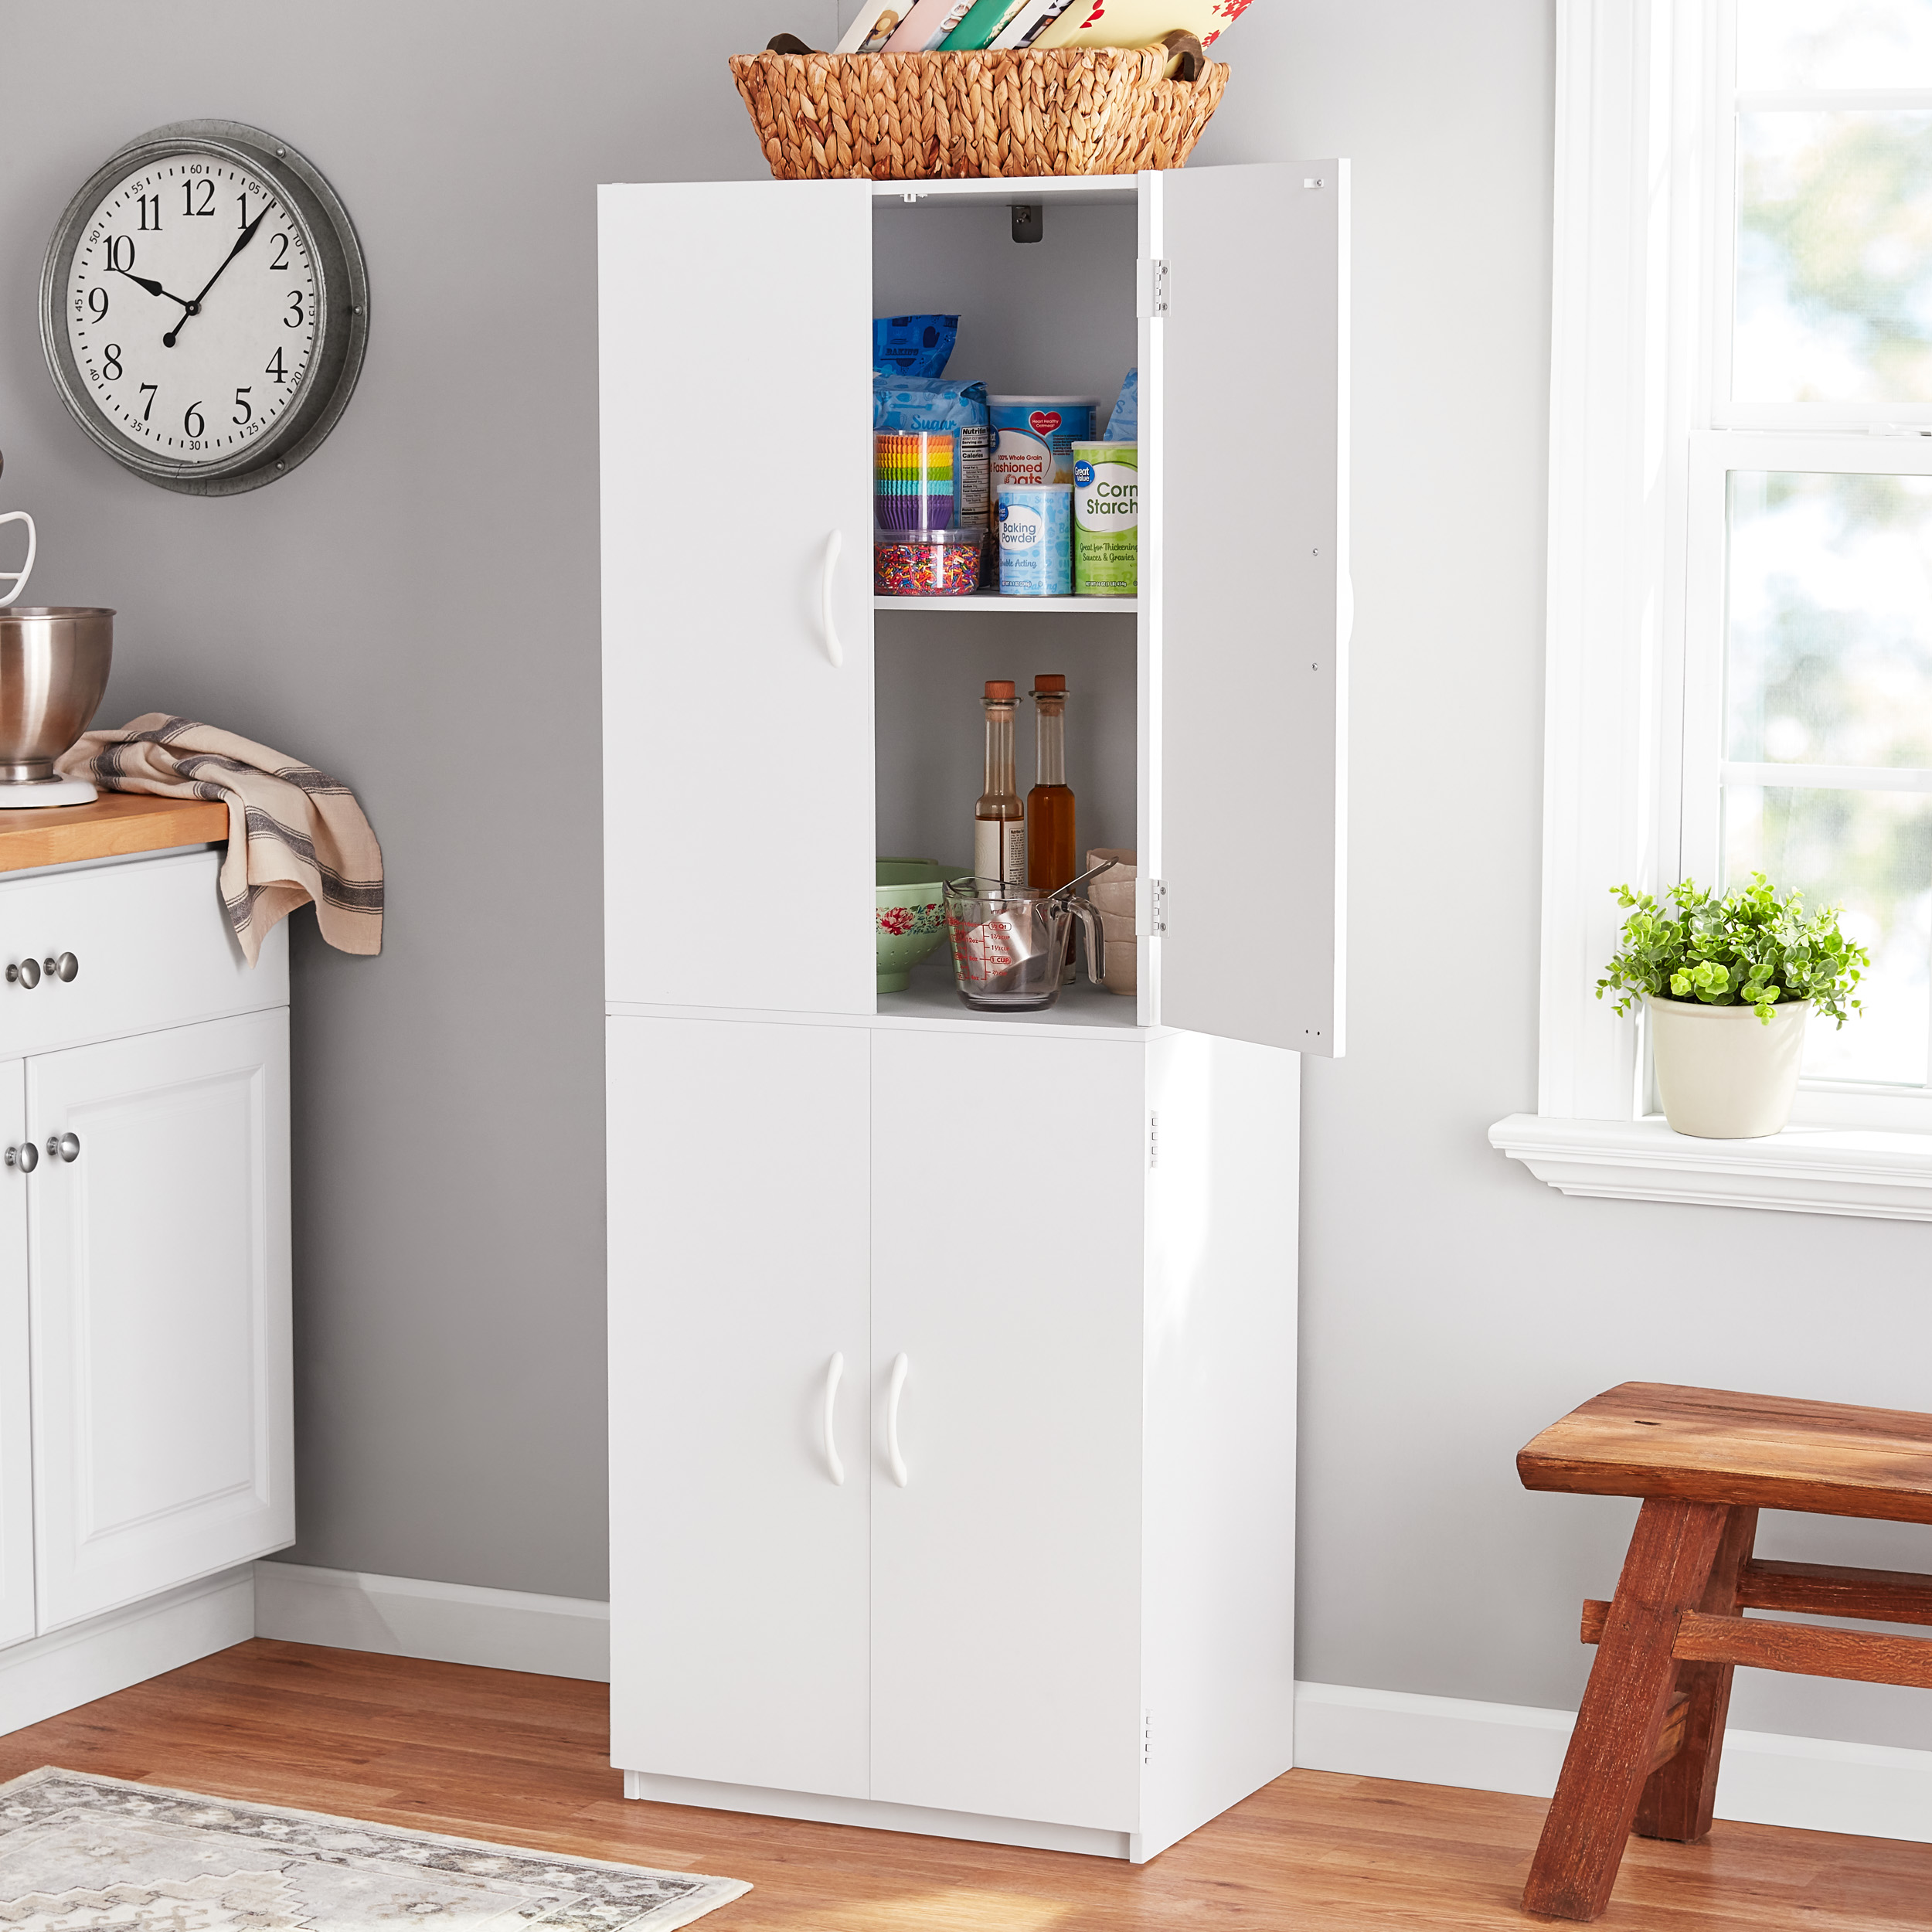 Mainstays 4-Door 5-Foot Storage Cabinet with Adjustable Shelves, White Stipple - image 1 of 17